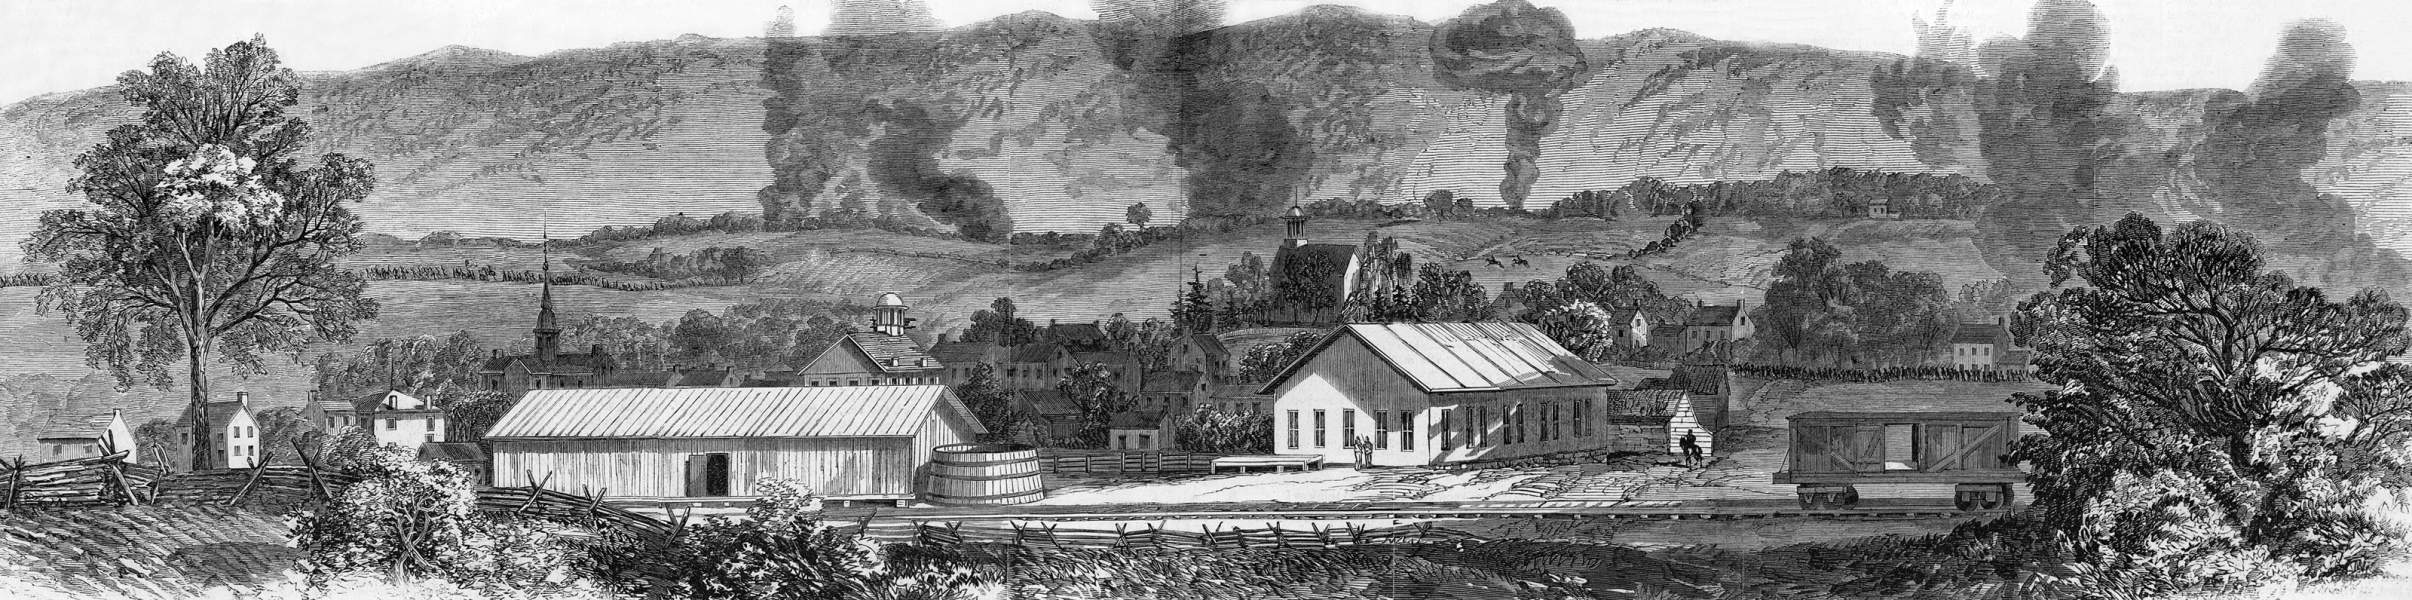 Woodstock, Virginia, October 1864, during Sheridan's Campaign, artist's impression, zoomable image